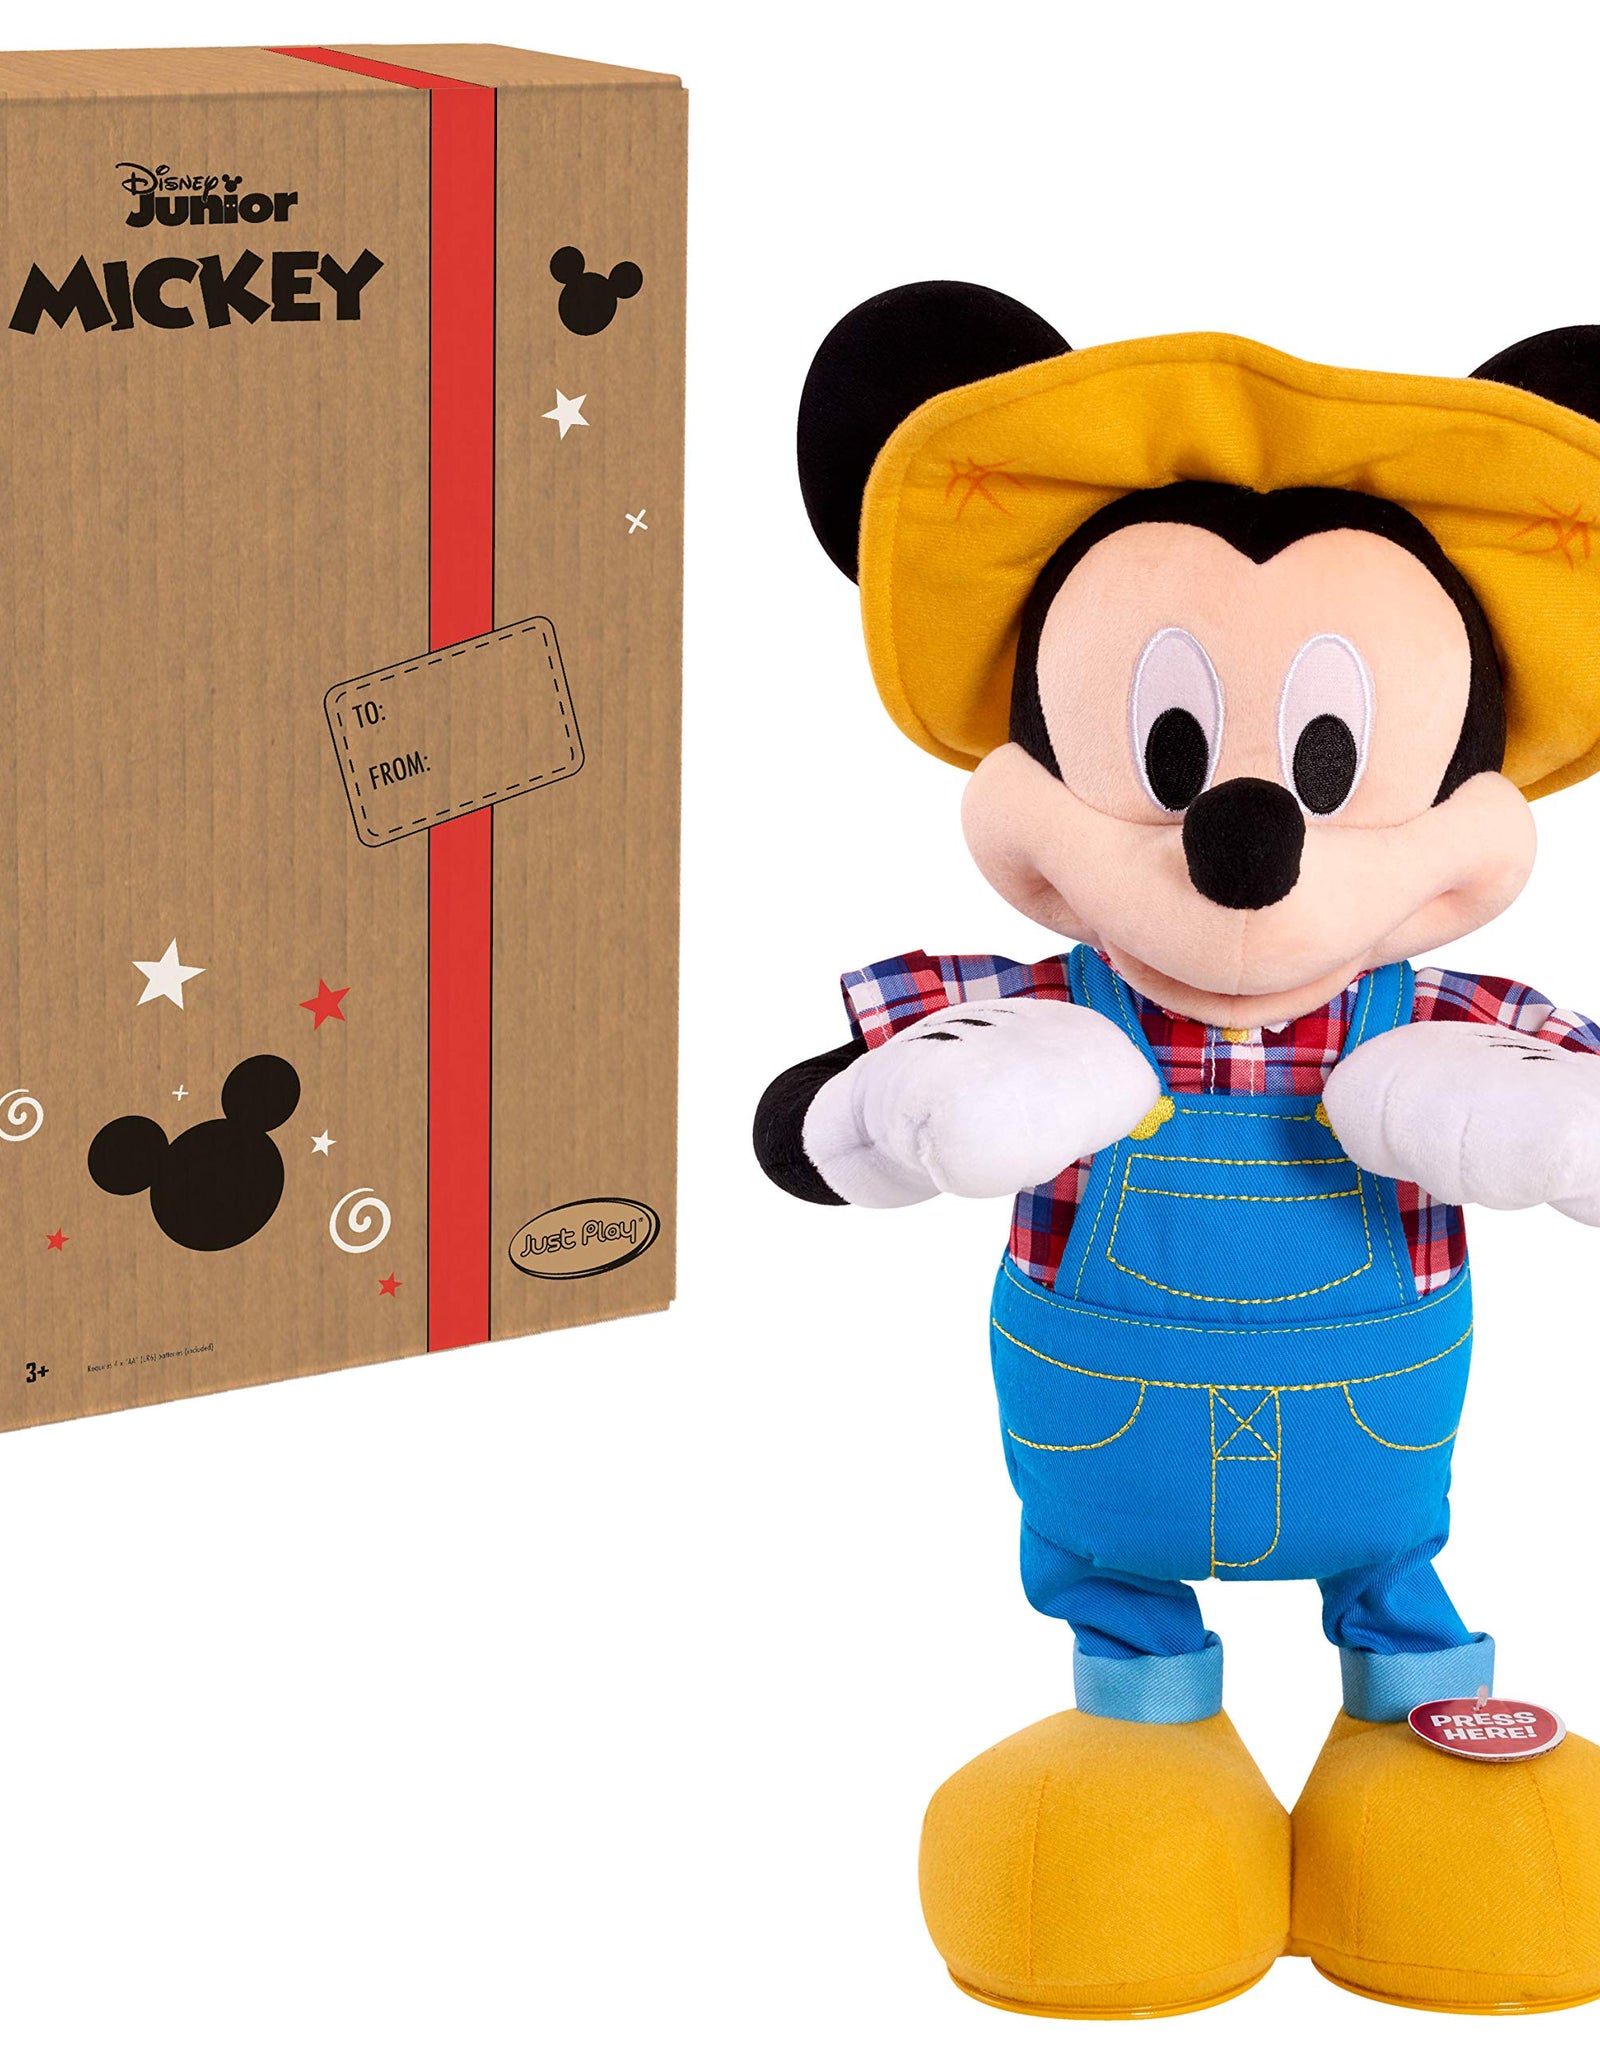 Disney Junior E-I-Oh! Mickey Mouse, Interactive Plush Toy, Sings "Old MacDonald" and Plays “What Animal Sound is That?” Game, by Just Play